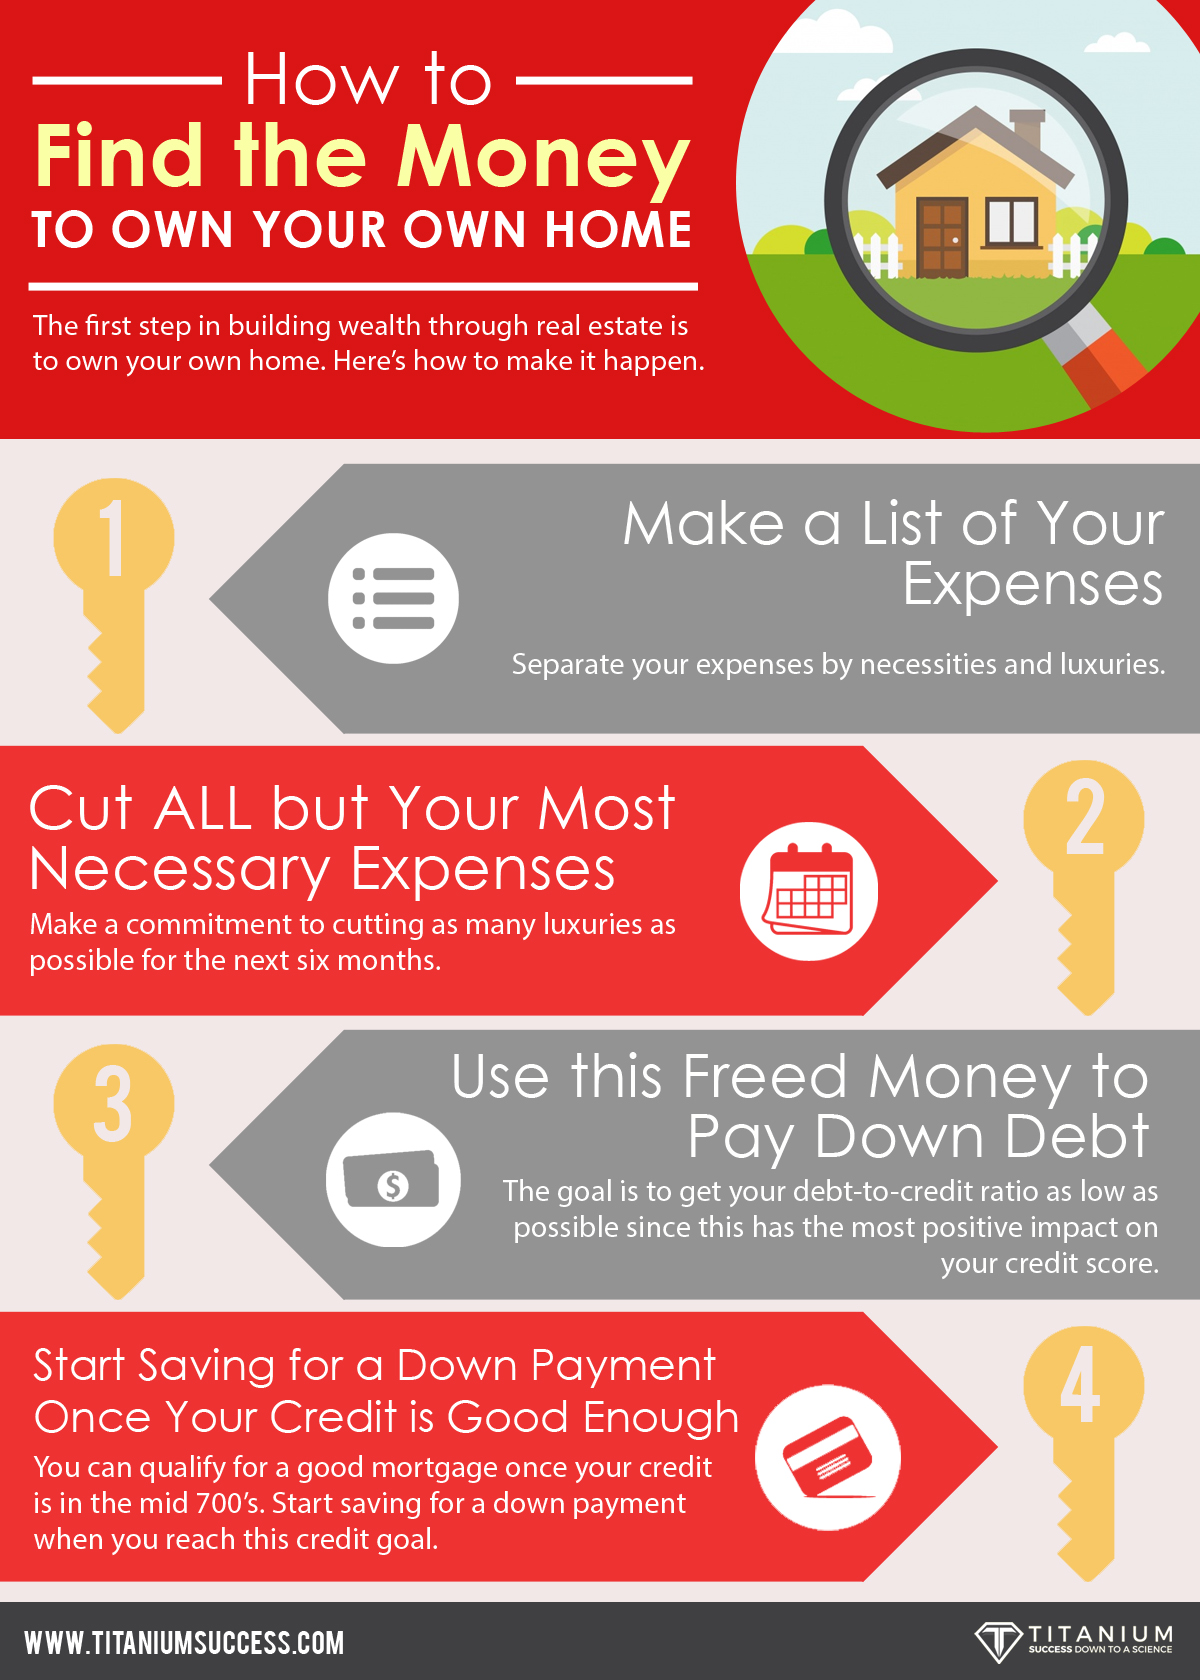 How to Find the Money to Own Your Own Home Infographic - TS